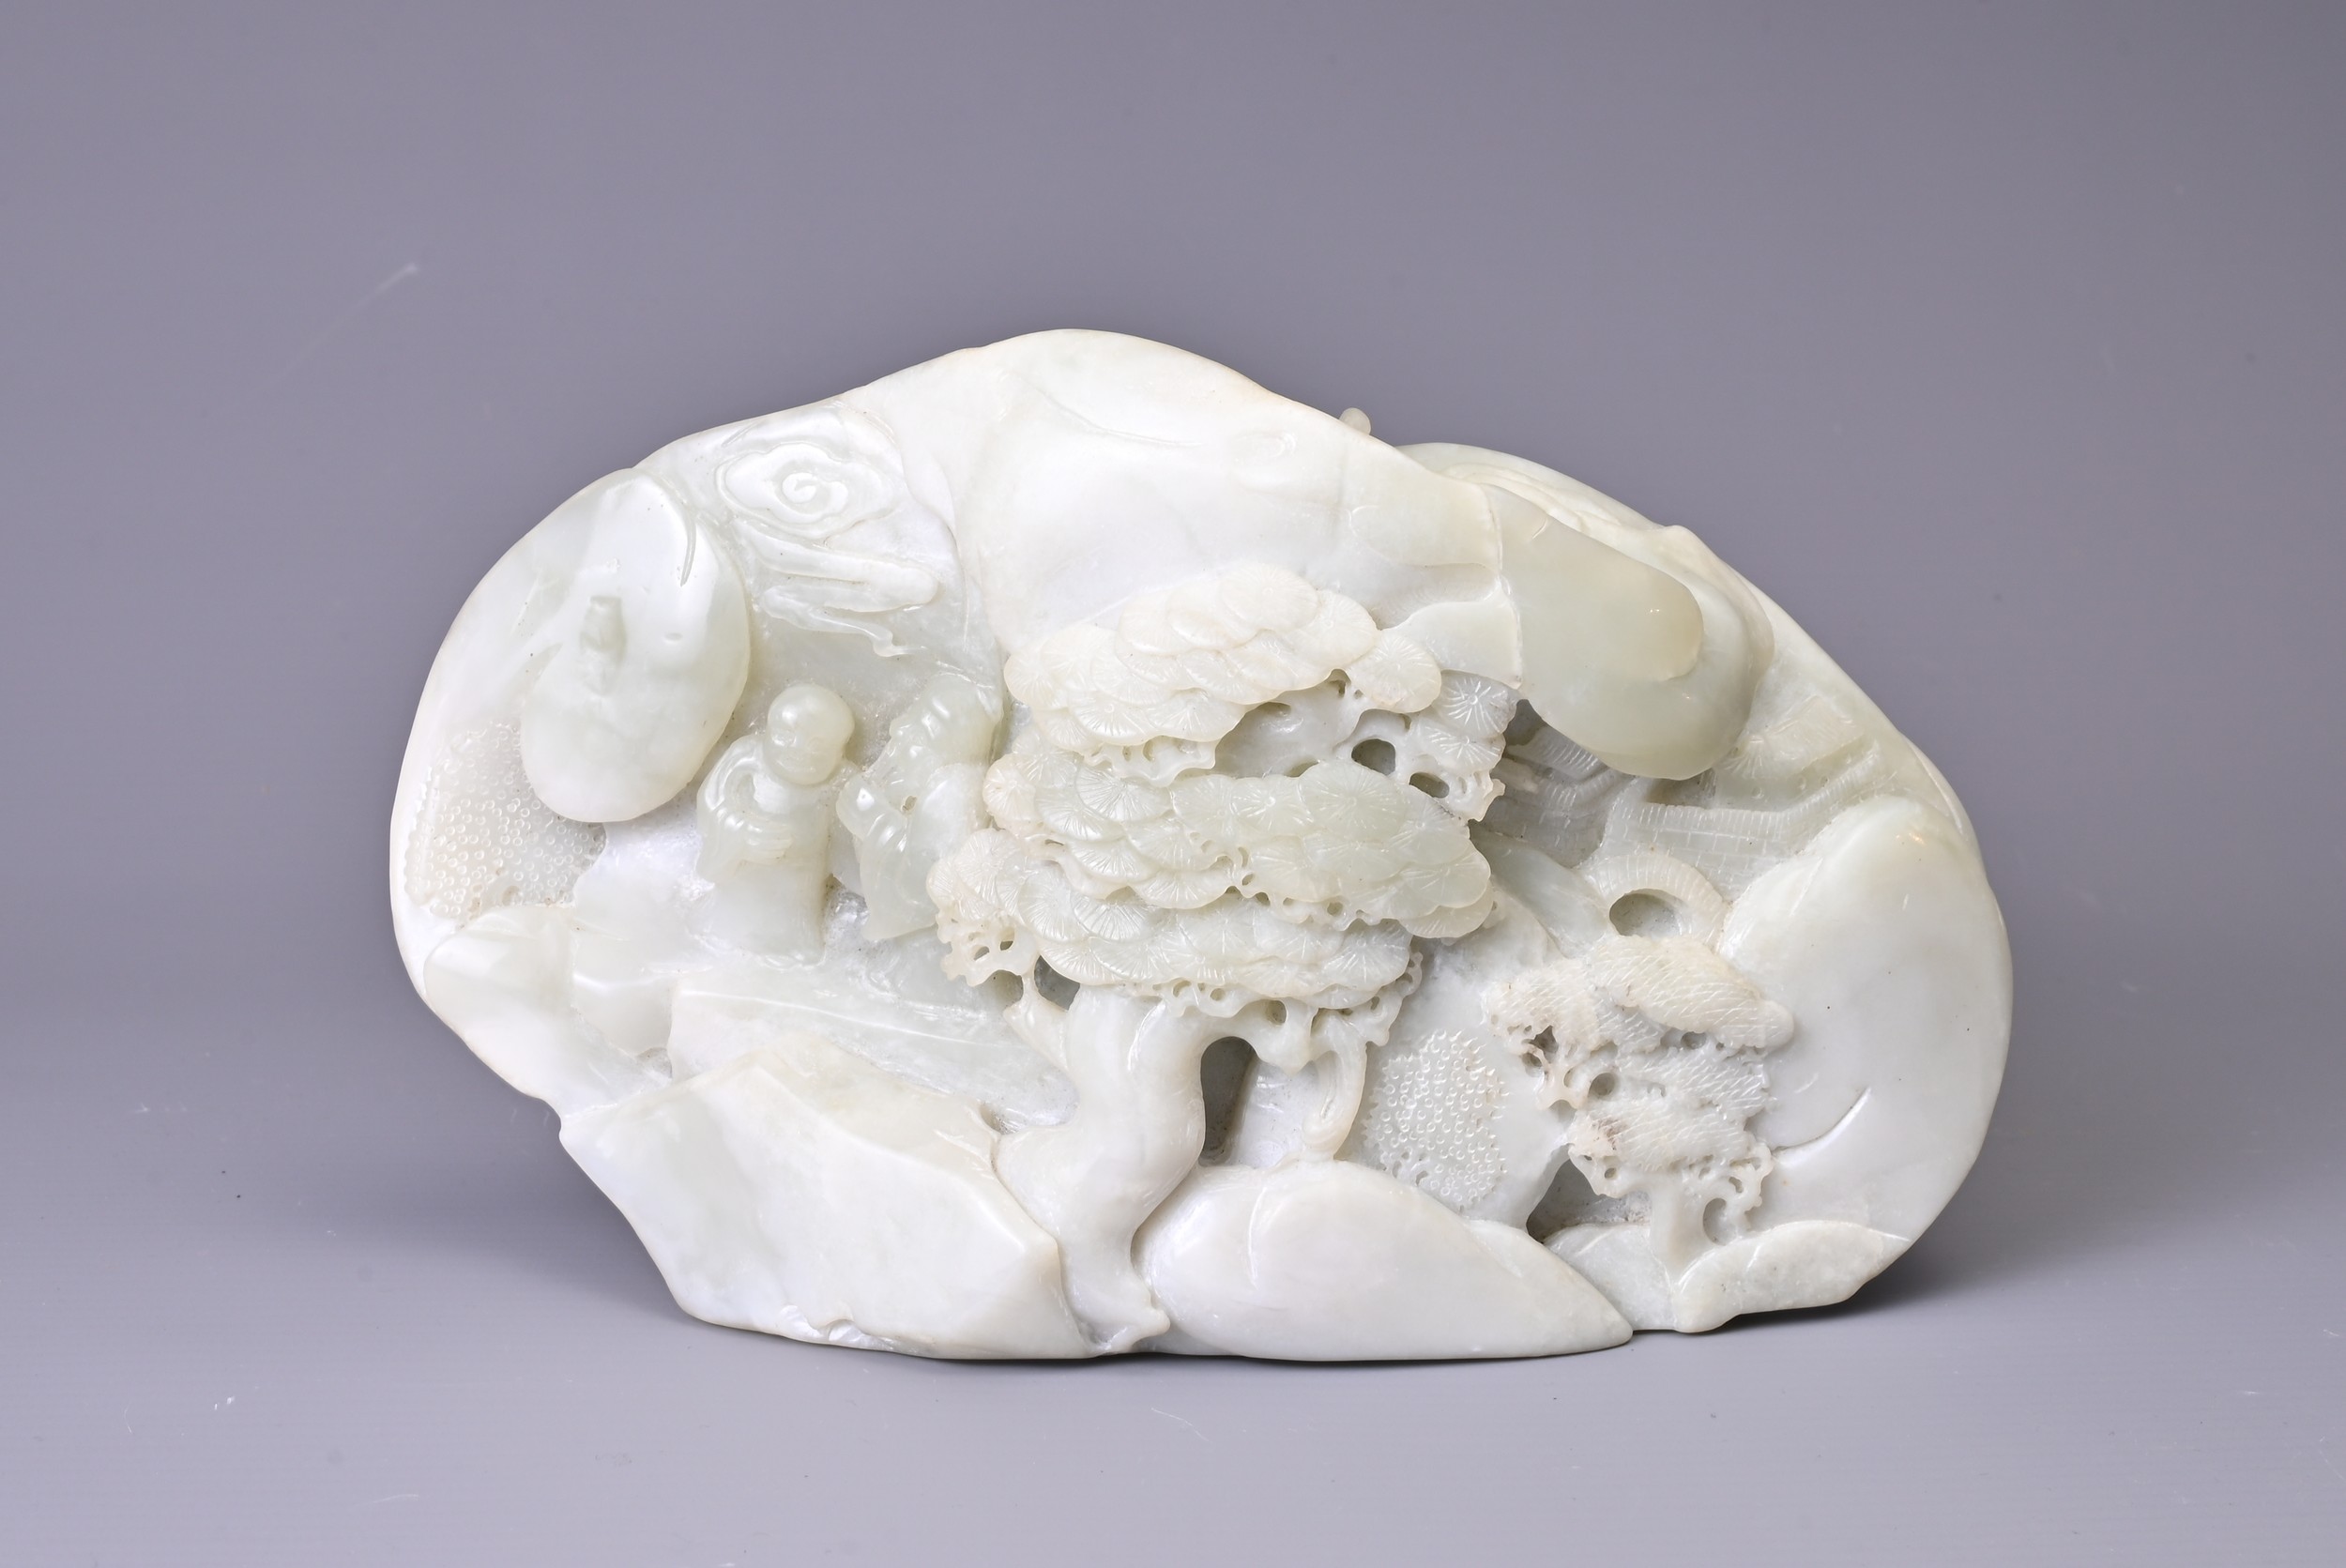 A CARVED PALE JADE BOULDER. Carved with two figures standing on pierced rockwork and trees, with